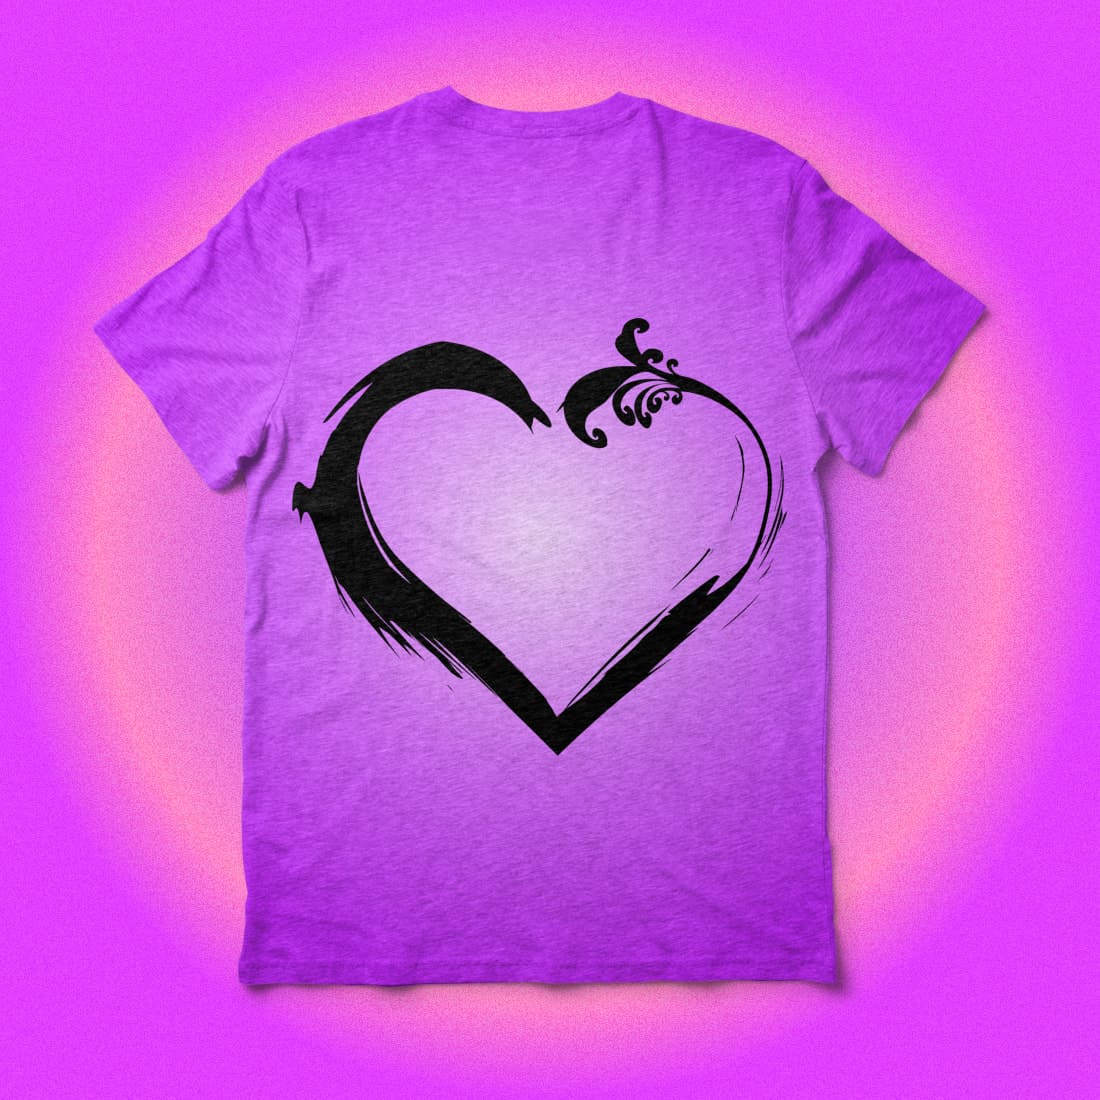 Graphics Photoshop Sweethearts Background on T-shirt.